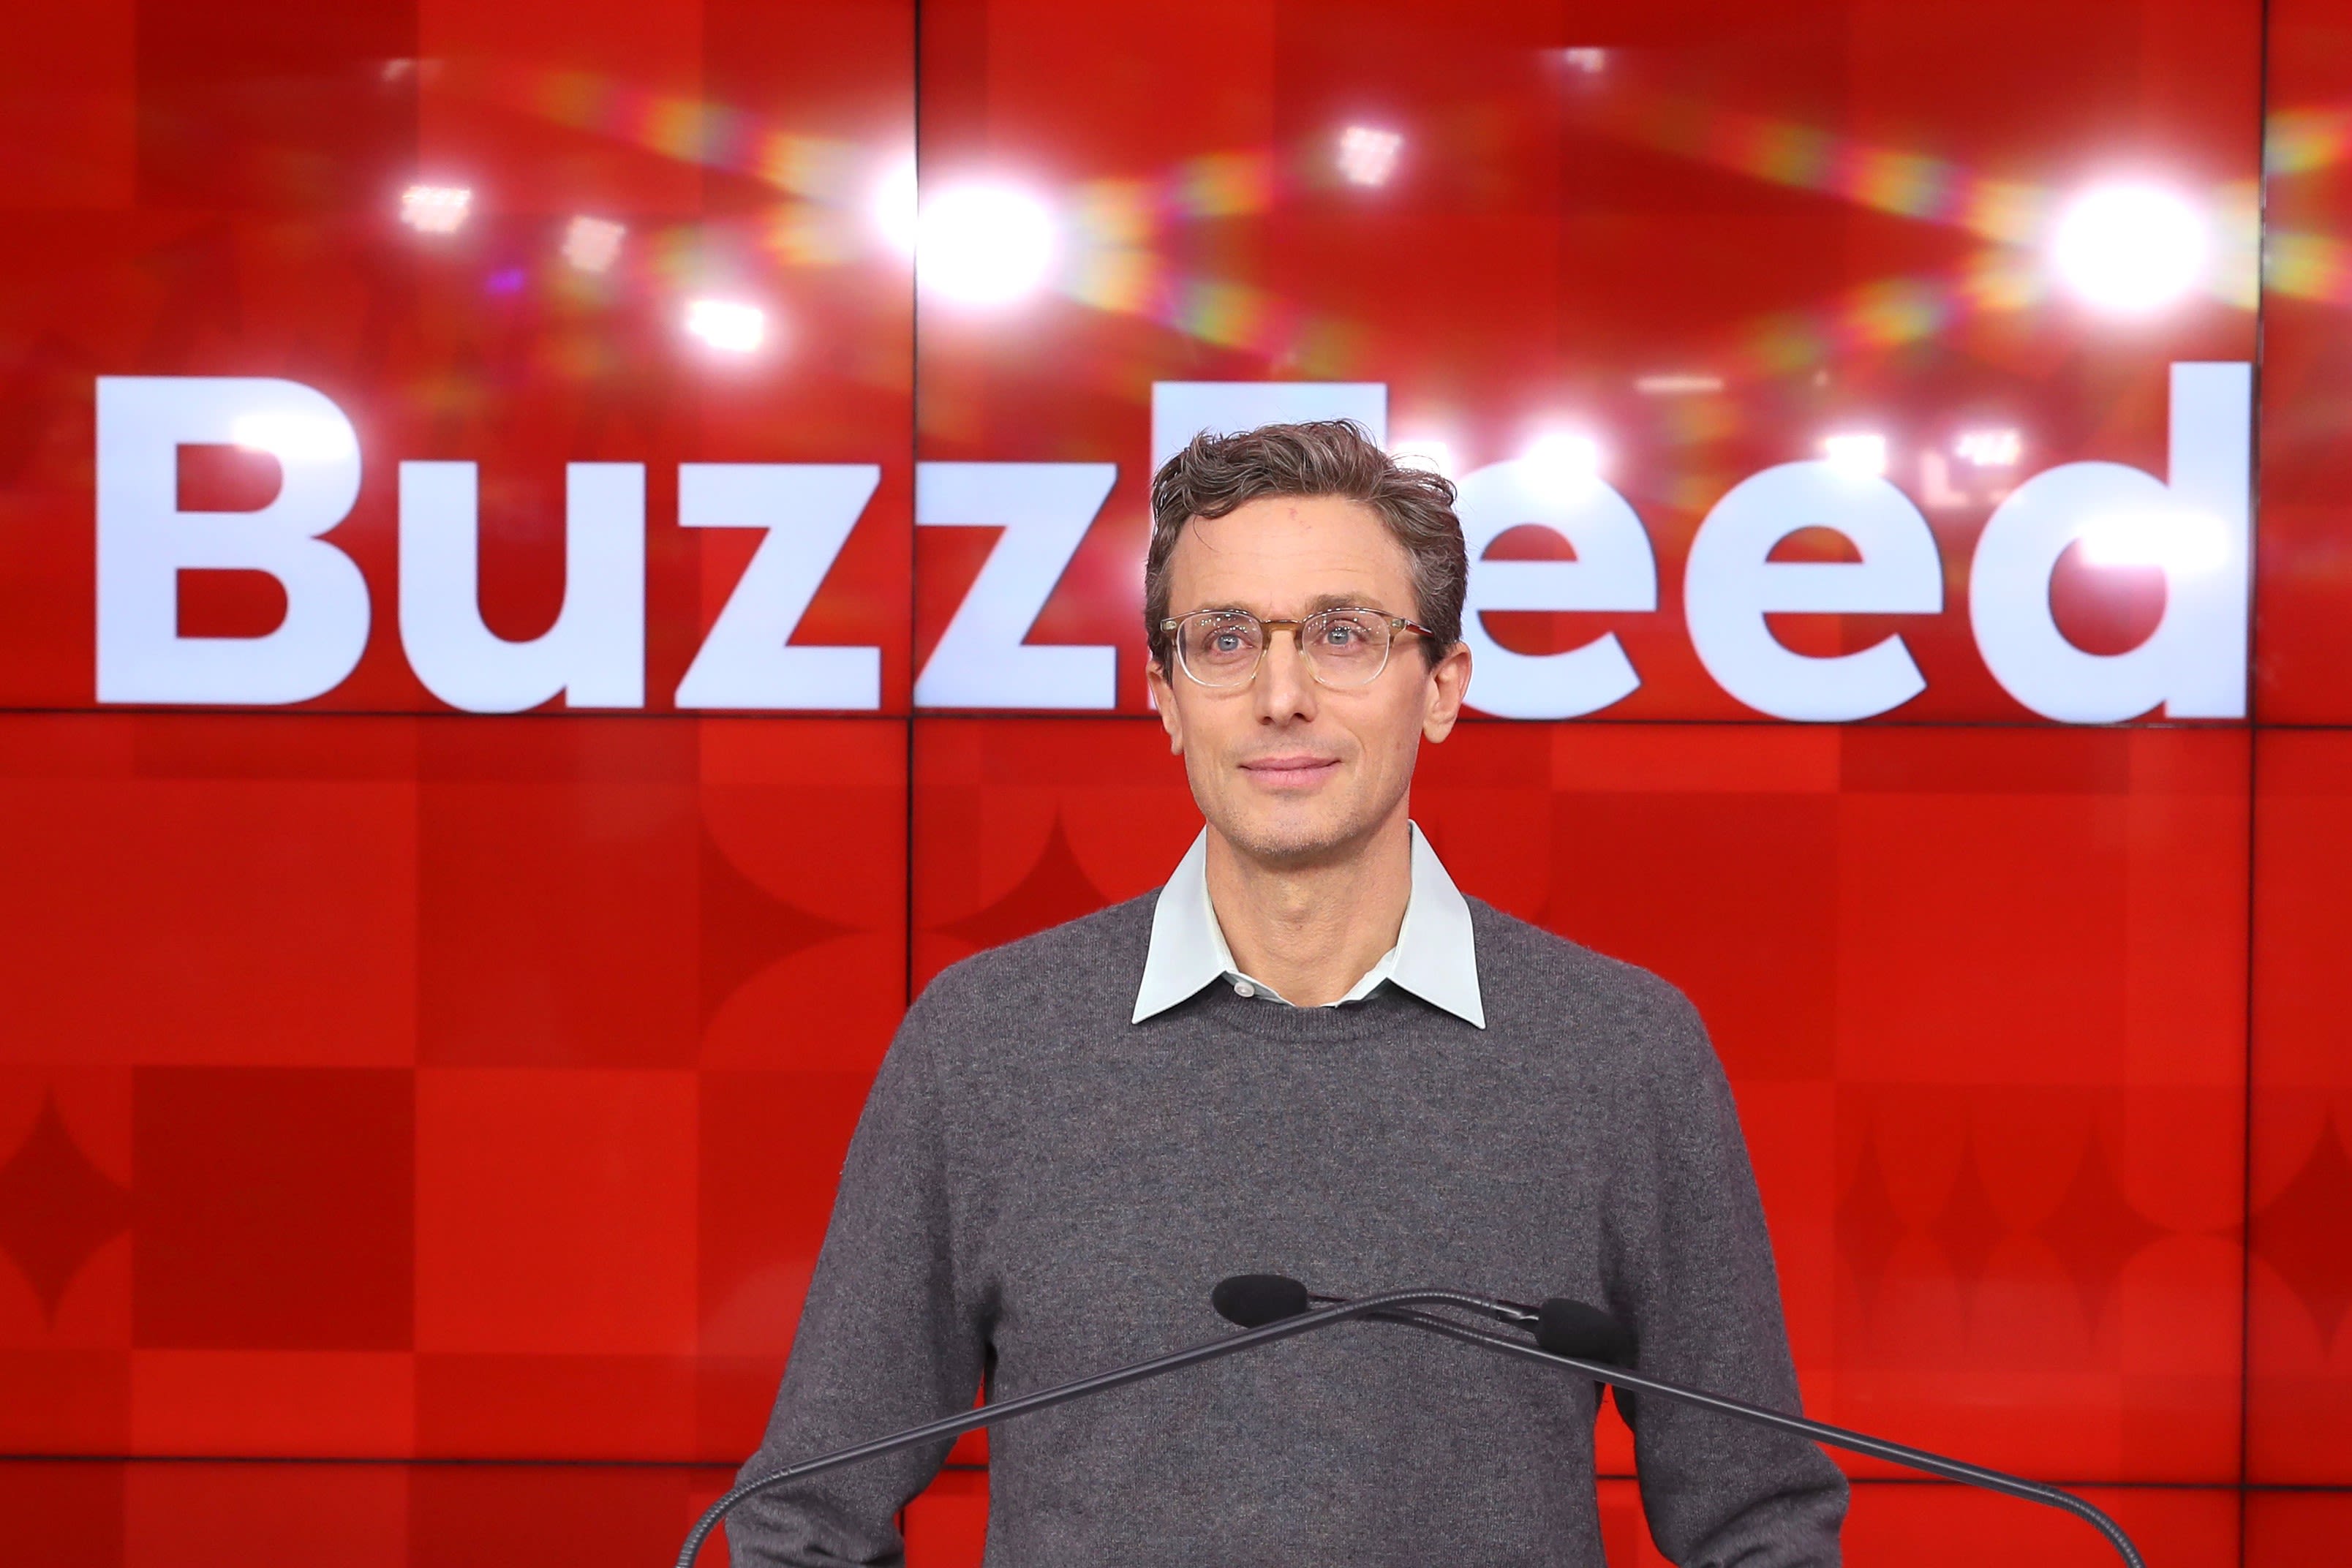 BuzzFeed CEO Jonah Peretti Takes Salary Cut, Shifting Most of His Compensation to Stock. Will It Make a Difference?